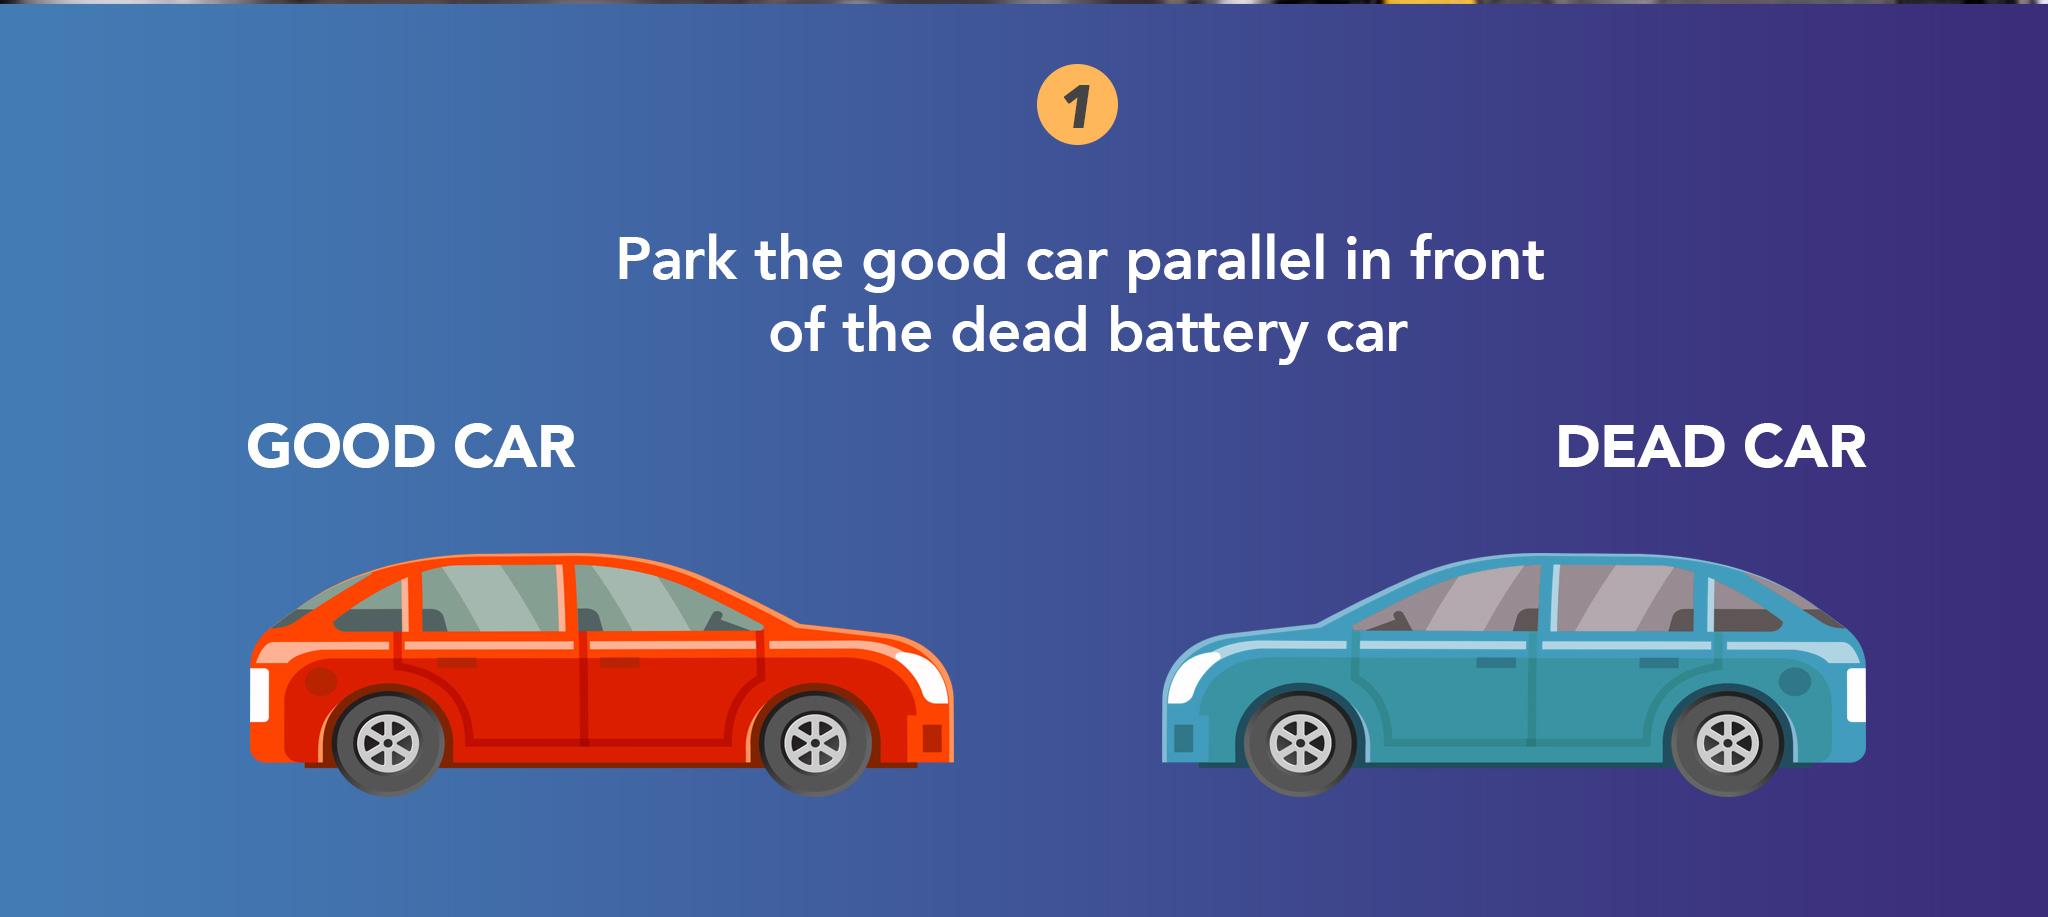 Park the good car parallel in front of the dead battery car